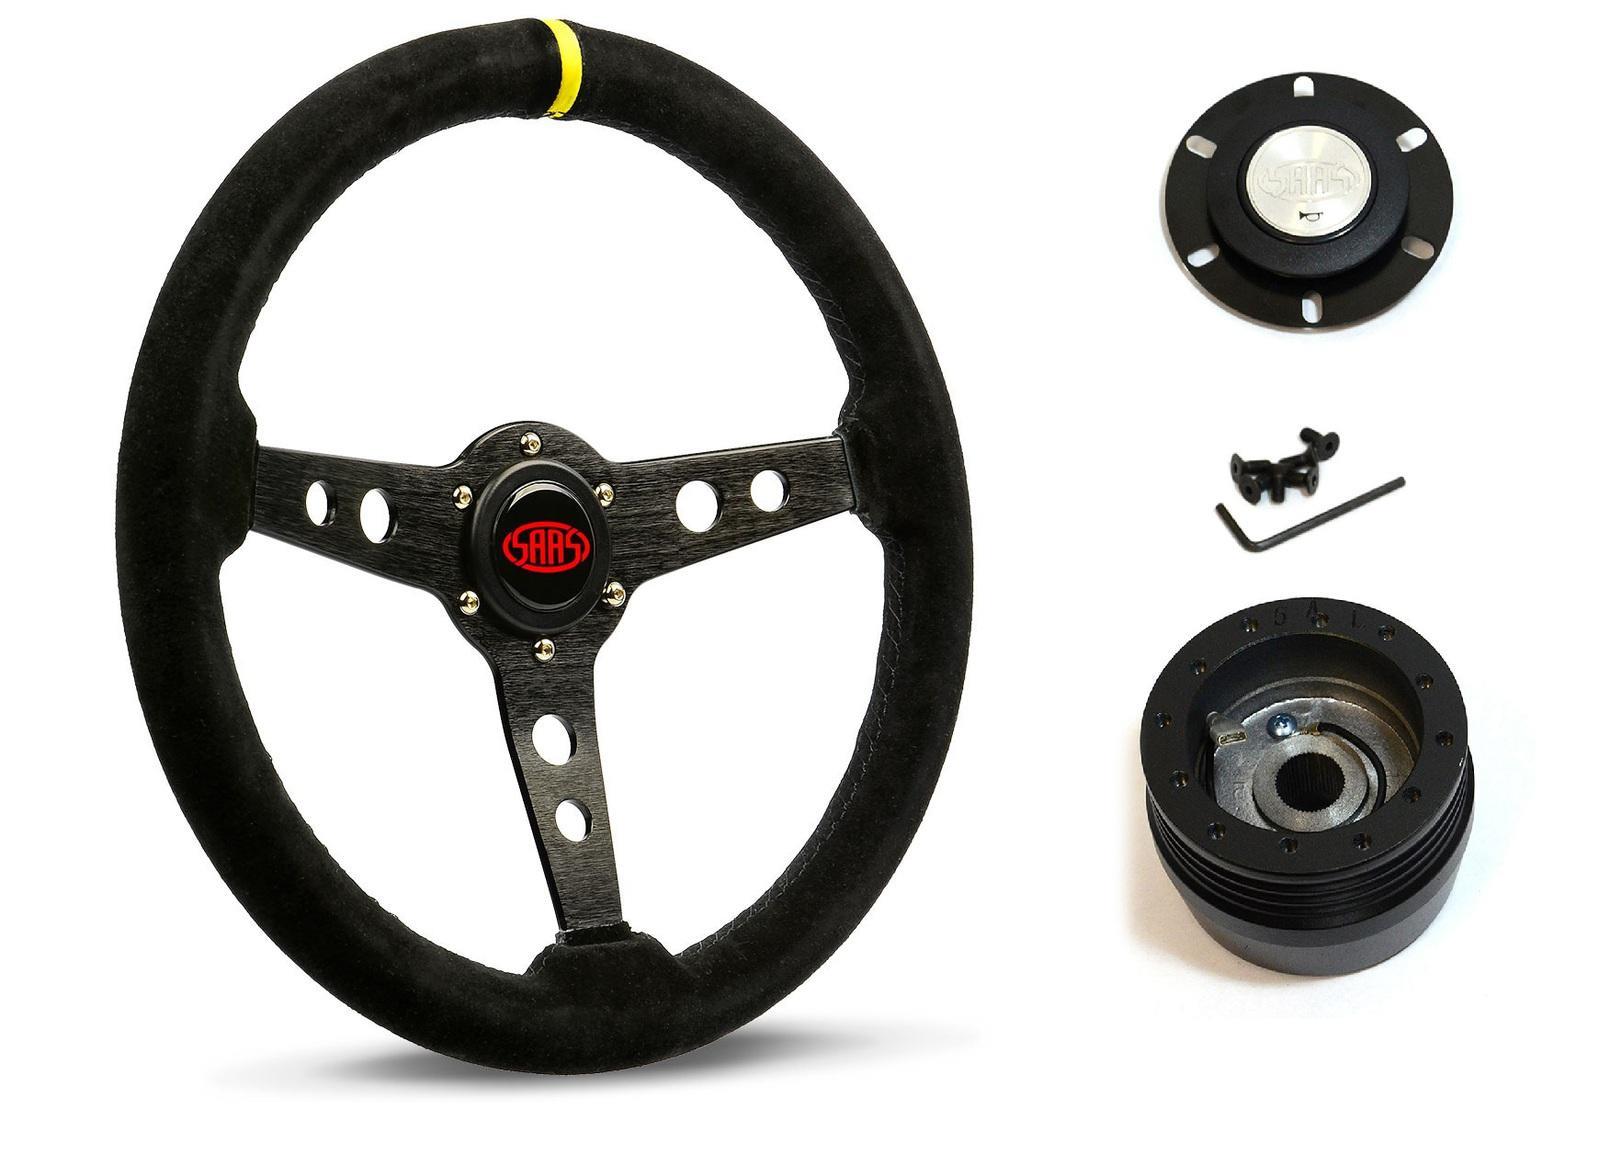 SAAS Steering Wheel Suede 14" ADR Retro Black Spoke + Indicator SW616OS-S and SAAS boss kit for Holden Monaro HQ HJ HX 1971-1980